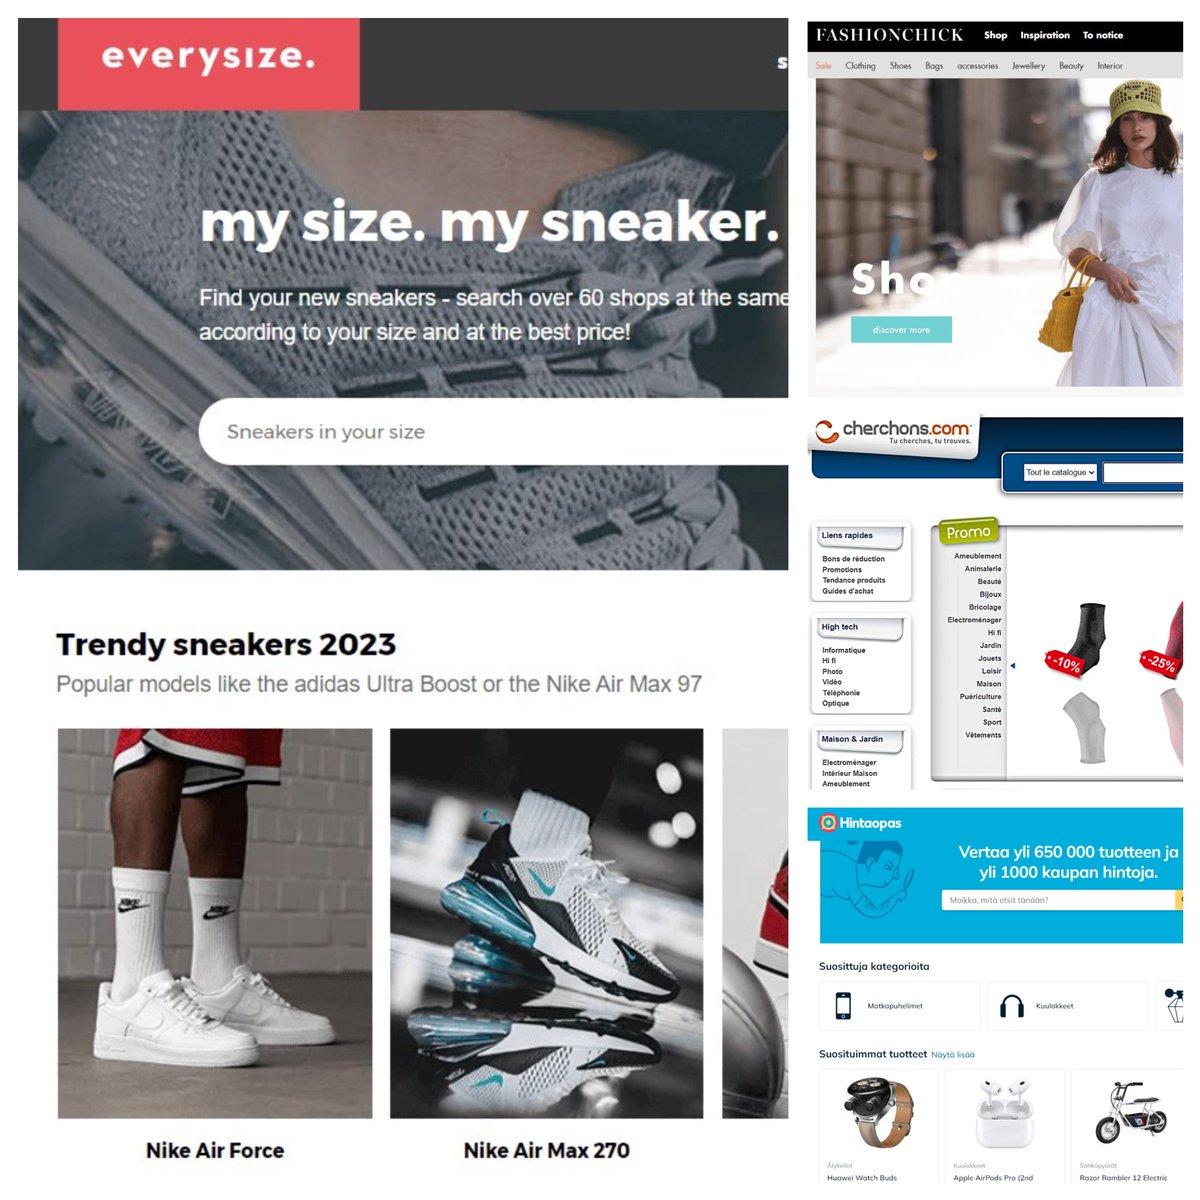 Expand the revenue sources for your #Shopify store. Discover the latest preconfigured feed templates for #Hintaseuranta, @Hintaopas_FI, @FashionchickUK, #Comparer, #ePRICE, @everysize_com, @Cherchons_com!

With @MulwiApp, dozens of your next shoppers are just a click away!